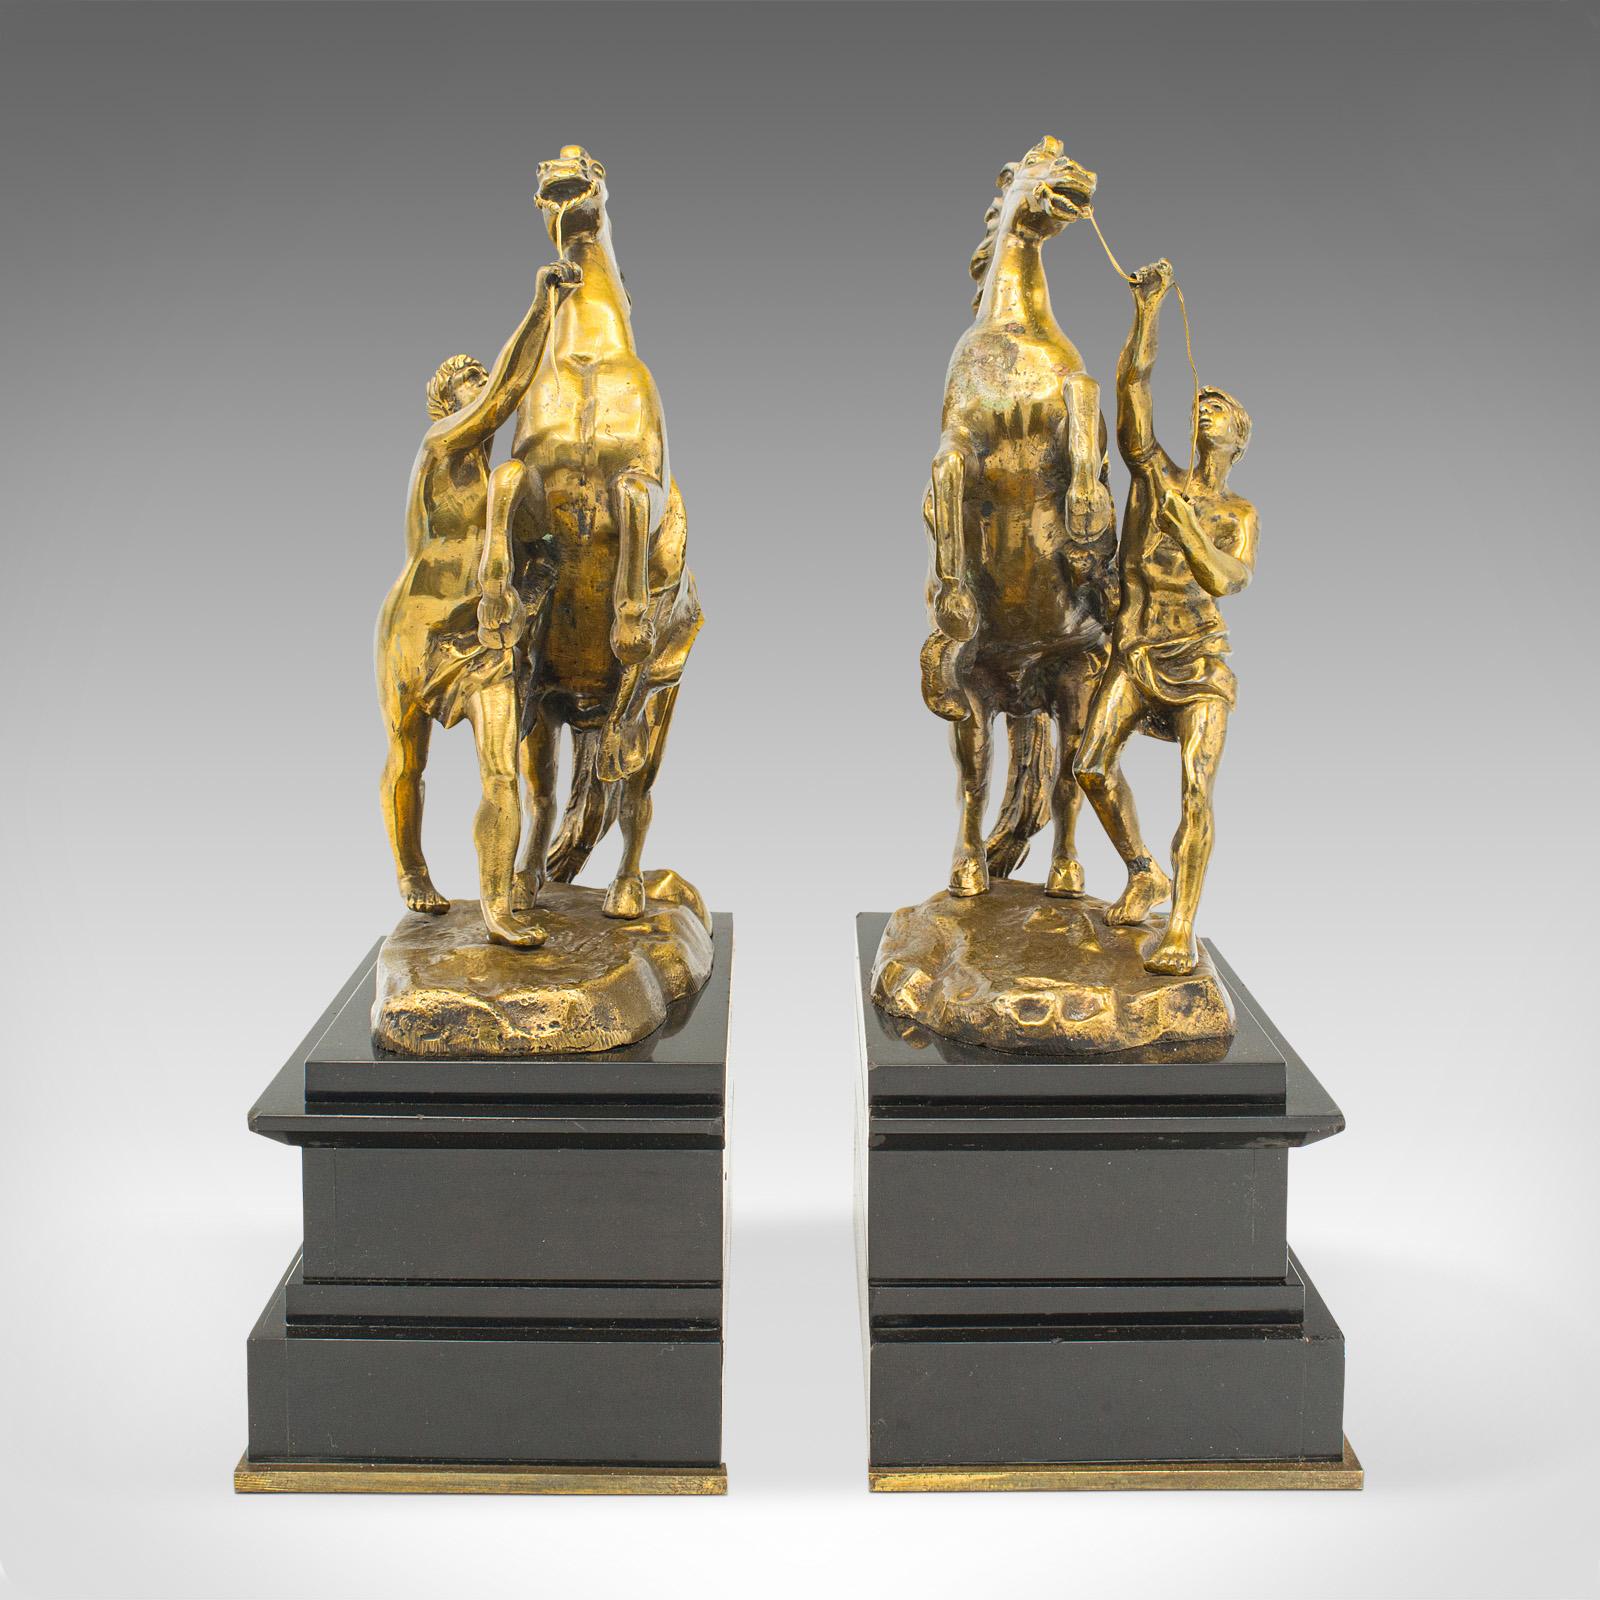 This is a pair of antique Marly Horse bookends. A French, bronze and slate Grand Tour book rest, dating to the Victorian period, circa 1860.

Substantial bookends with striking golden finish and famous subject matter
Displaying a desirable aged